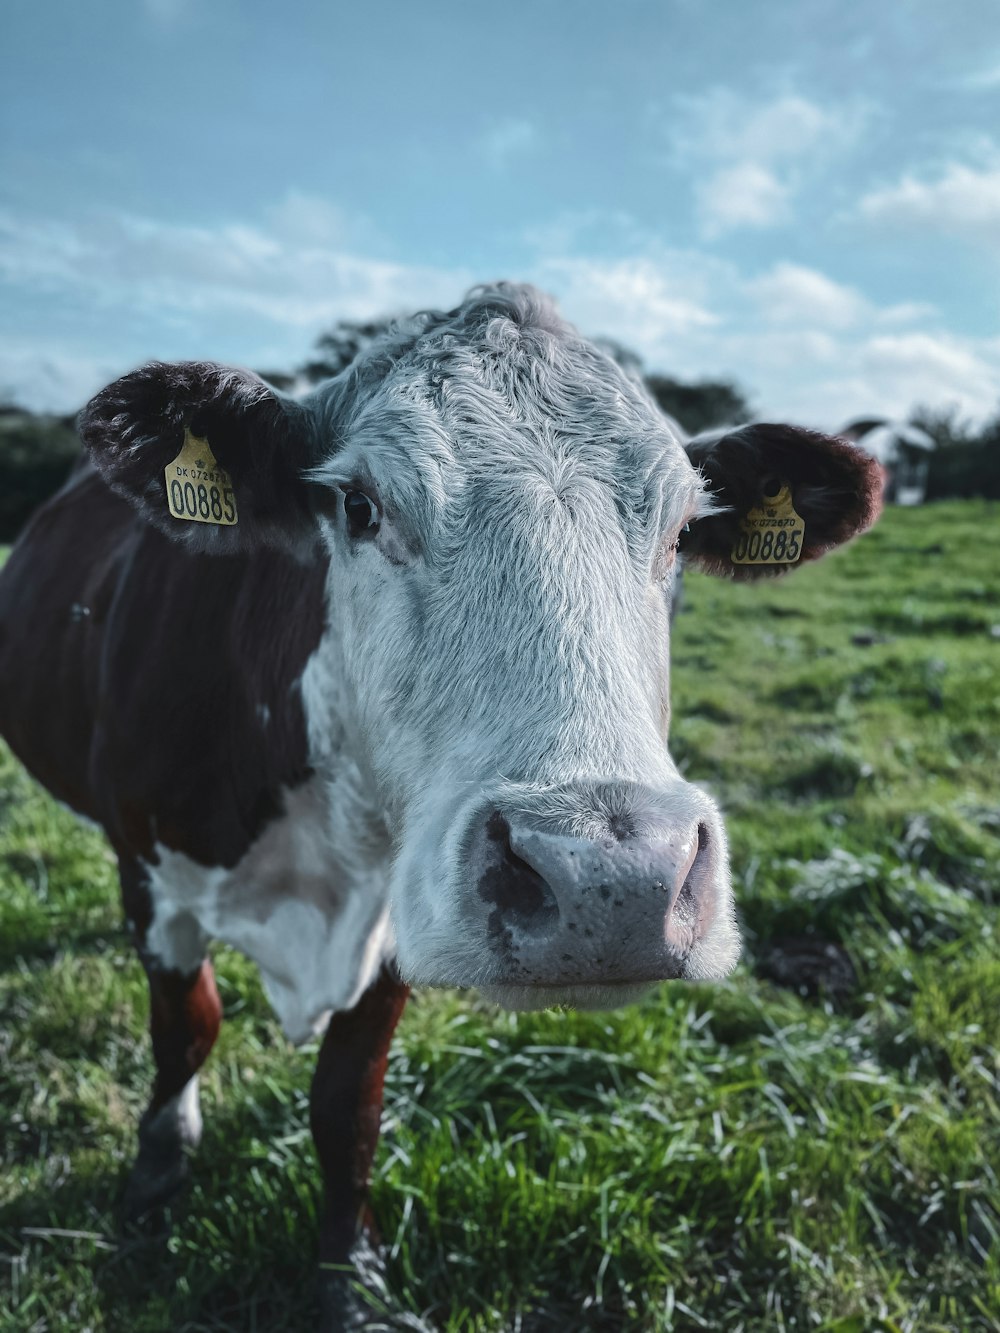 a close up of a cow in a field